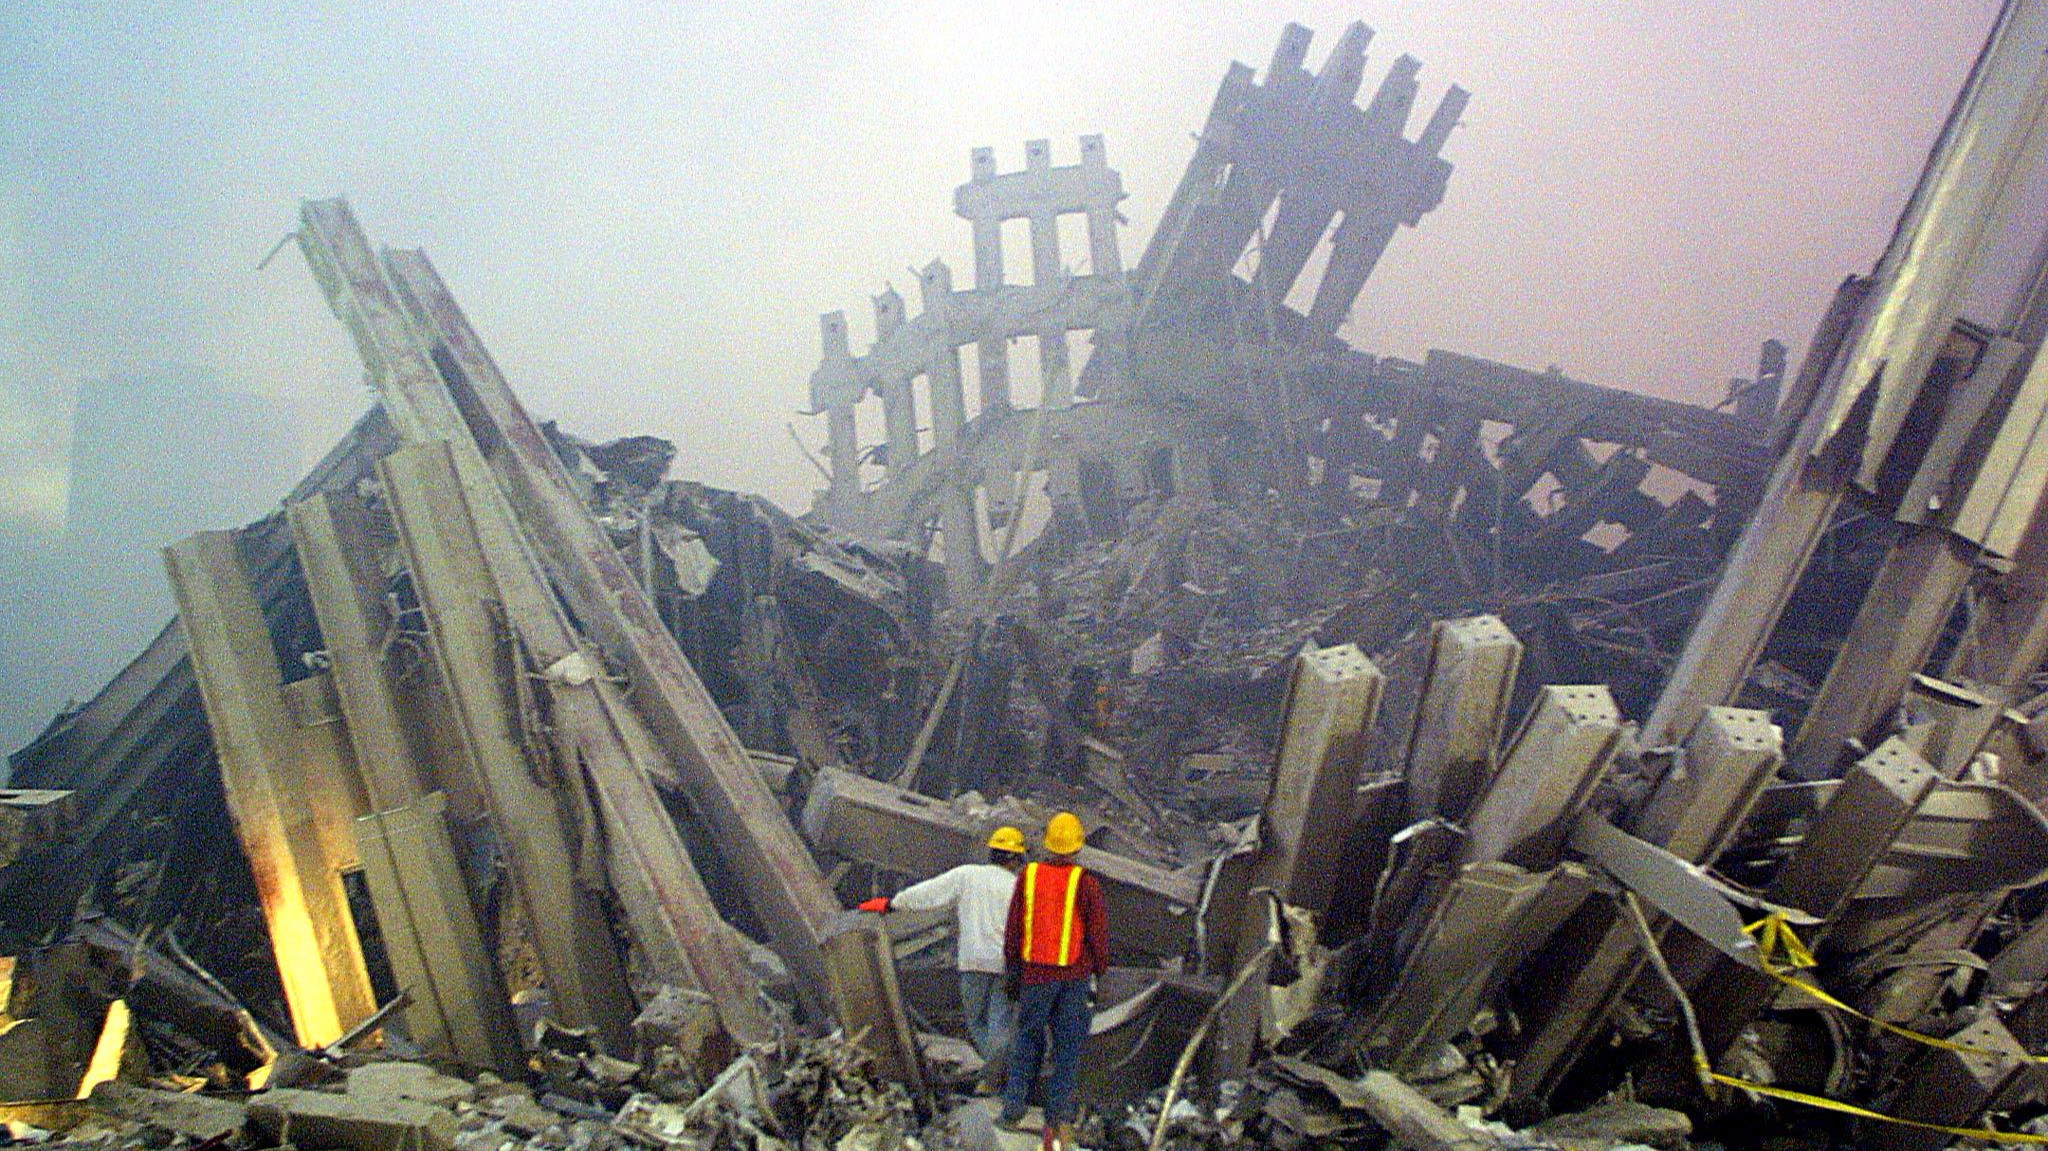 Death by a Thousand Cuts: The Many Ways Our Rights Have Been Usurped Since 9/11